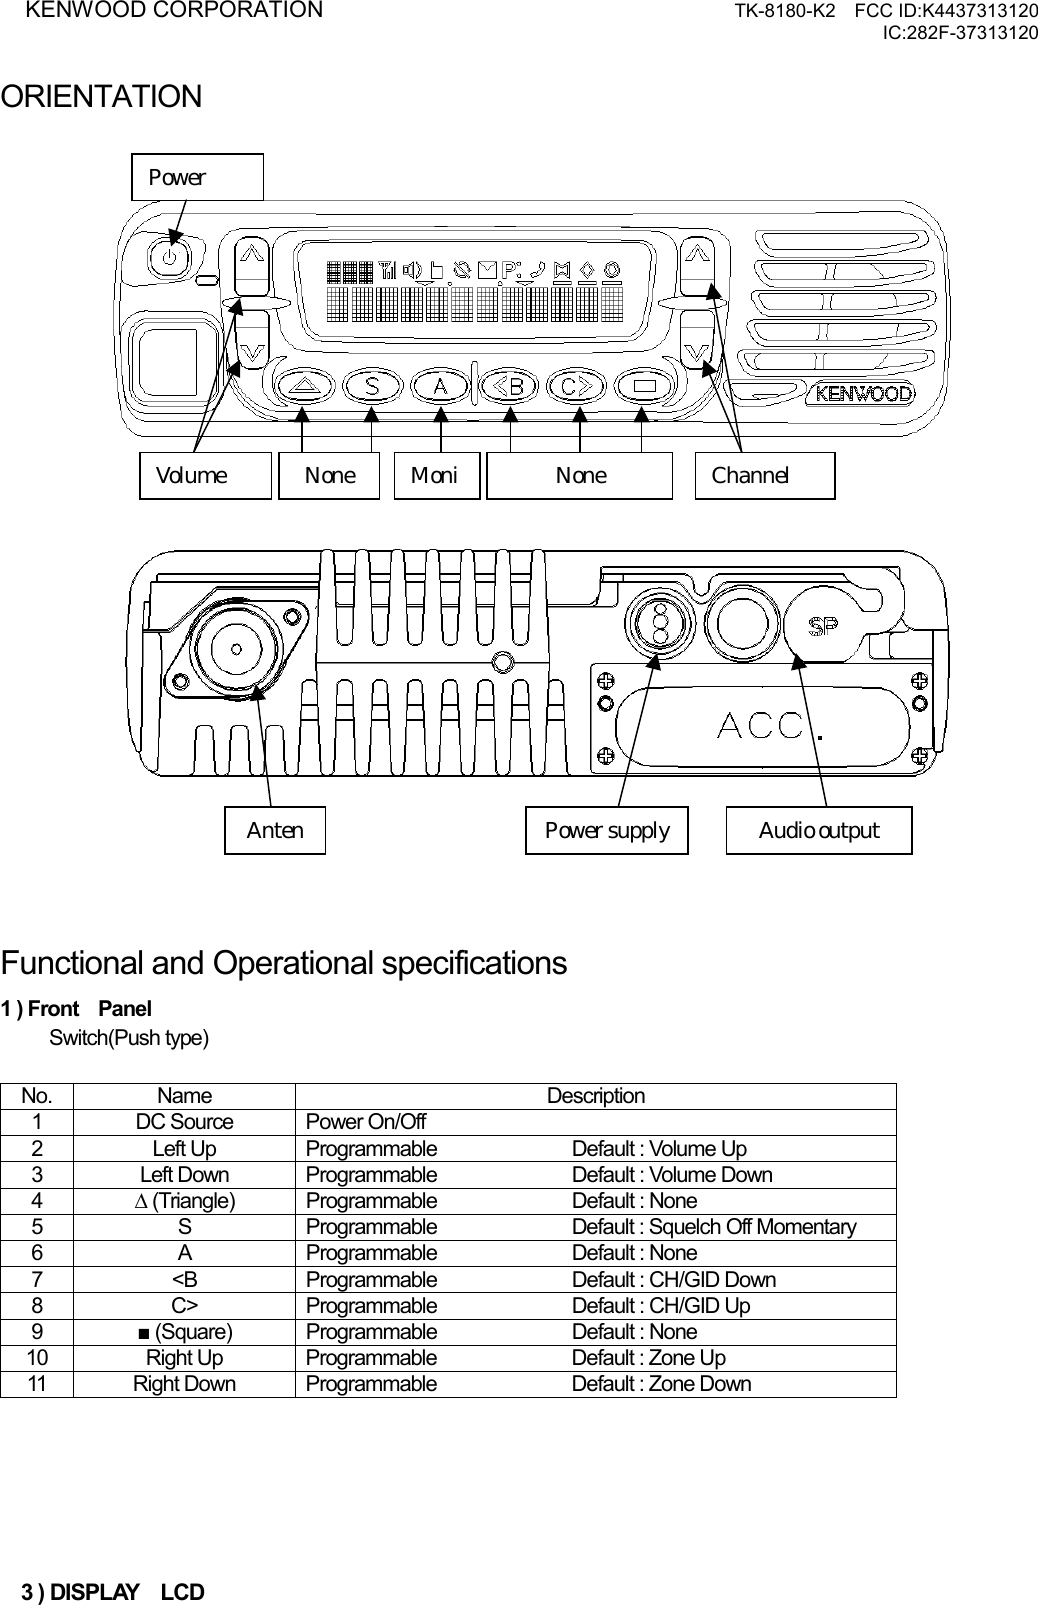 KENWOOD CORPORATION     TK-8180-K2  FCC ID:K4437313120 IC:282F-37313120  ORIENTATION                            Functional and Operational specifications 1 ) Front  Panel        Switch(Push type)  No. Name  Description 1 DC Source Power On/Off 2  Left Up  Programmable    Default : Volume Up 3  Left Down  Programmable    Default : Volume Down 4  ∆ (Triangle)  Programmable    Default : None 5  S  Programmable    Default : Squelch Off Momentary 6  A  Programmable    Default : None 7  &lt;B  Programmable    Default : CH/GID Down 8  C&gt;  Programmable    Default : CH/GID Up 9  ■ (Square)  Programmable    Default : None 10  Right Up  Programmable    Default : Zone Up 11  Right Down  Programmable    Default : Zone Down       3 ) DISPLAY  LCD Volume  Channel MoniNone  None Audio output Anten Power supply Power 